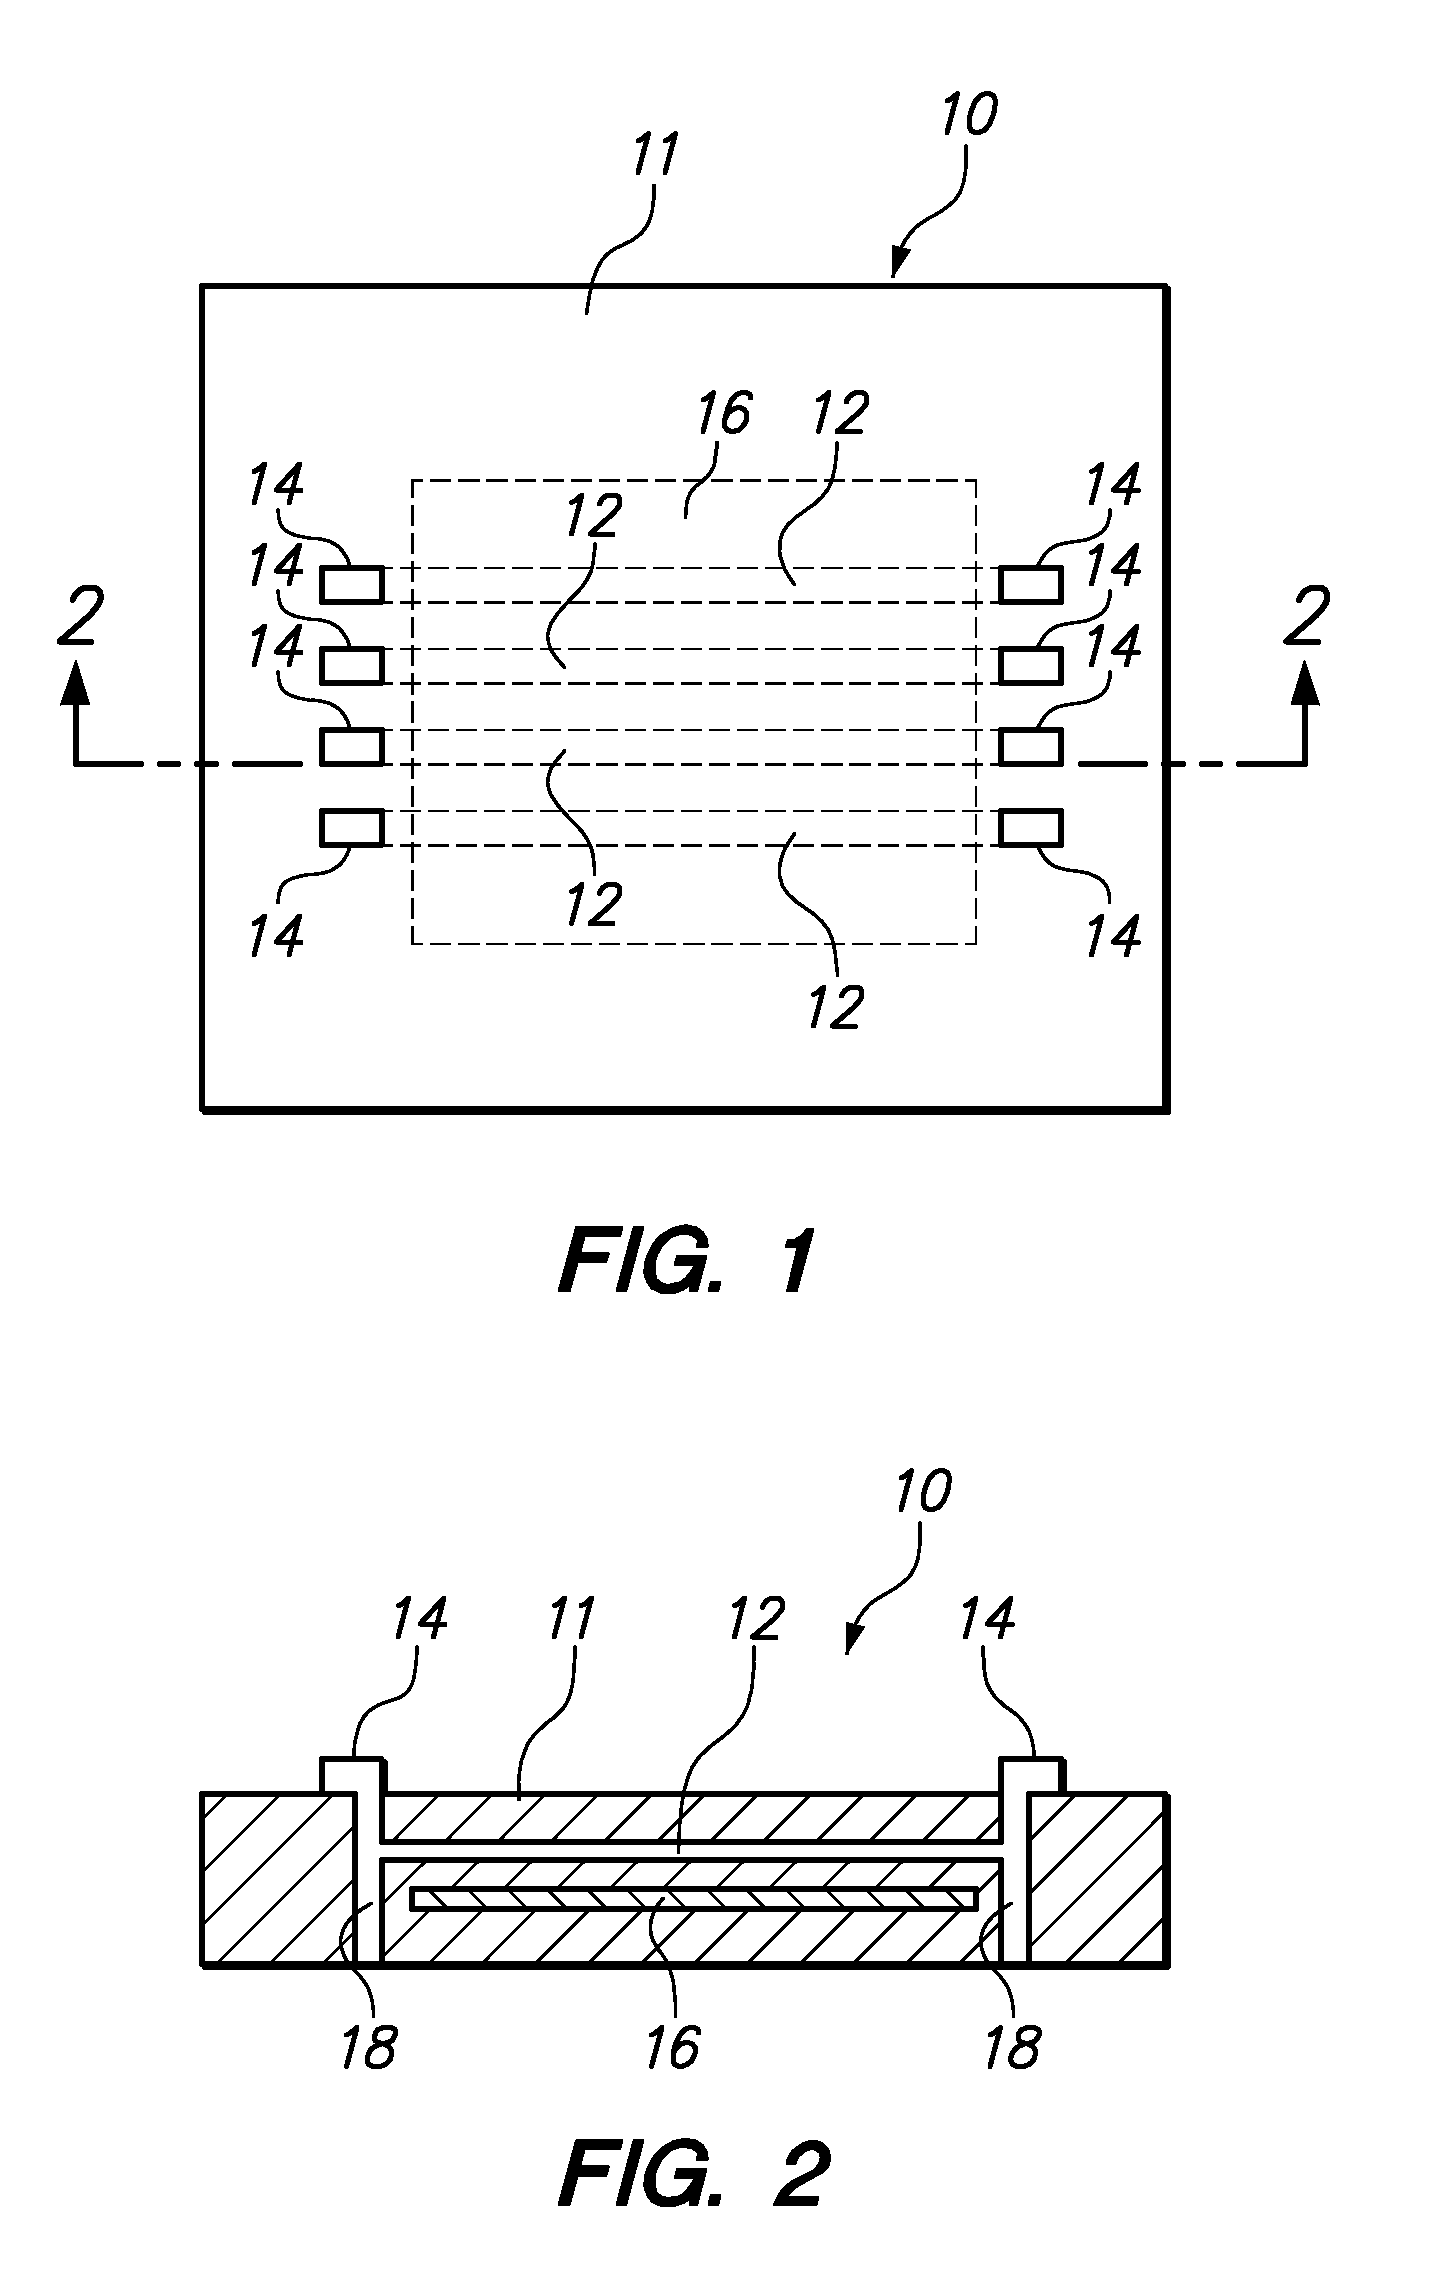 Method for Validating Printed Circuit Board Materials for High Speed Applications